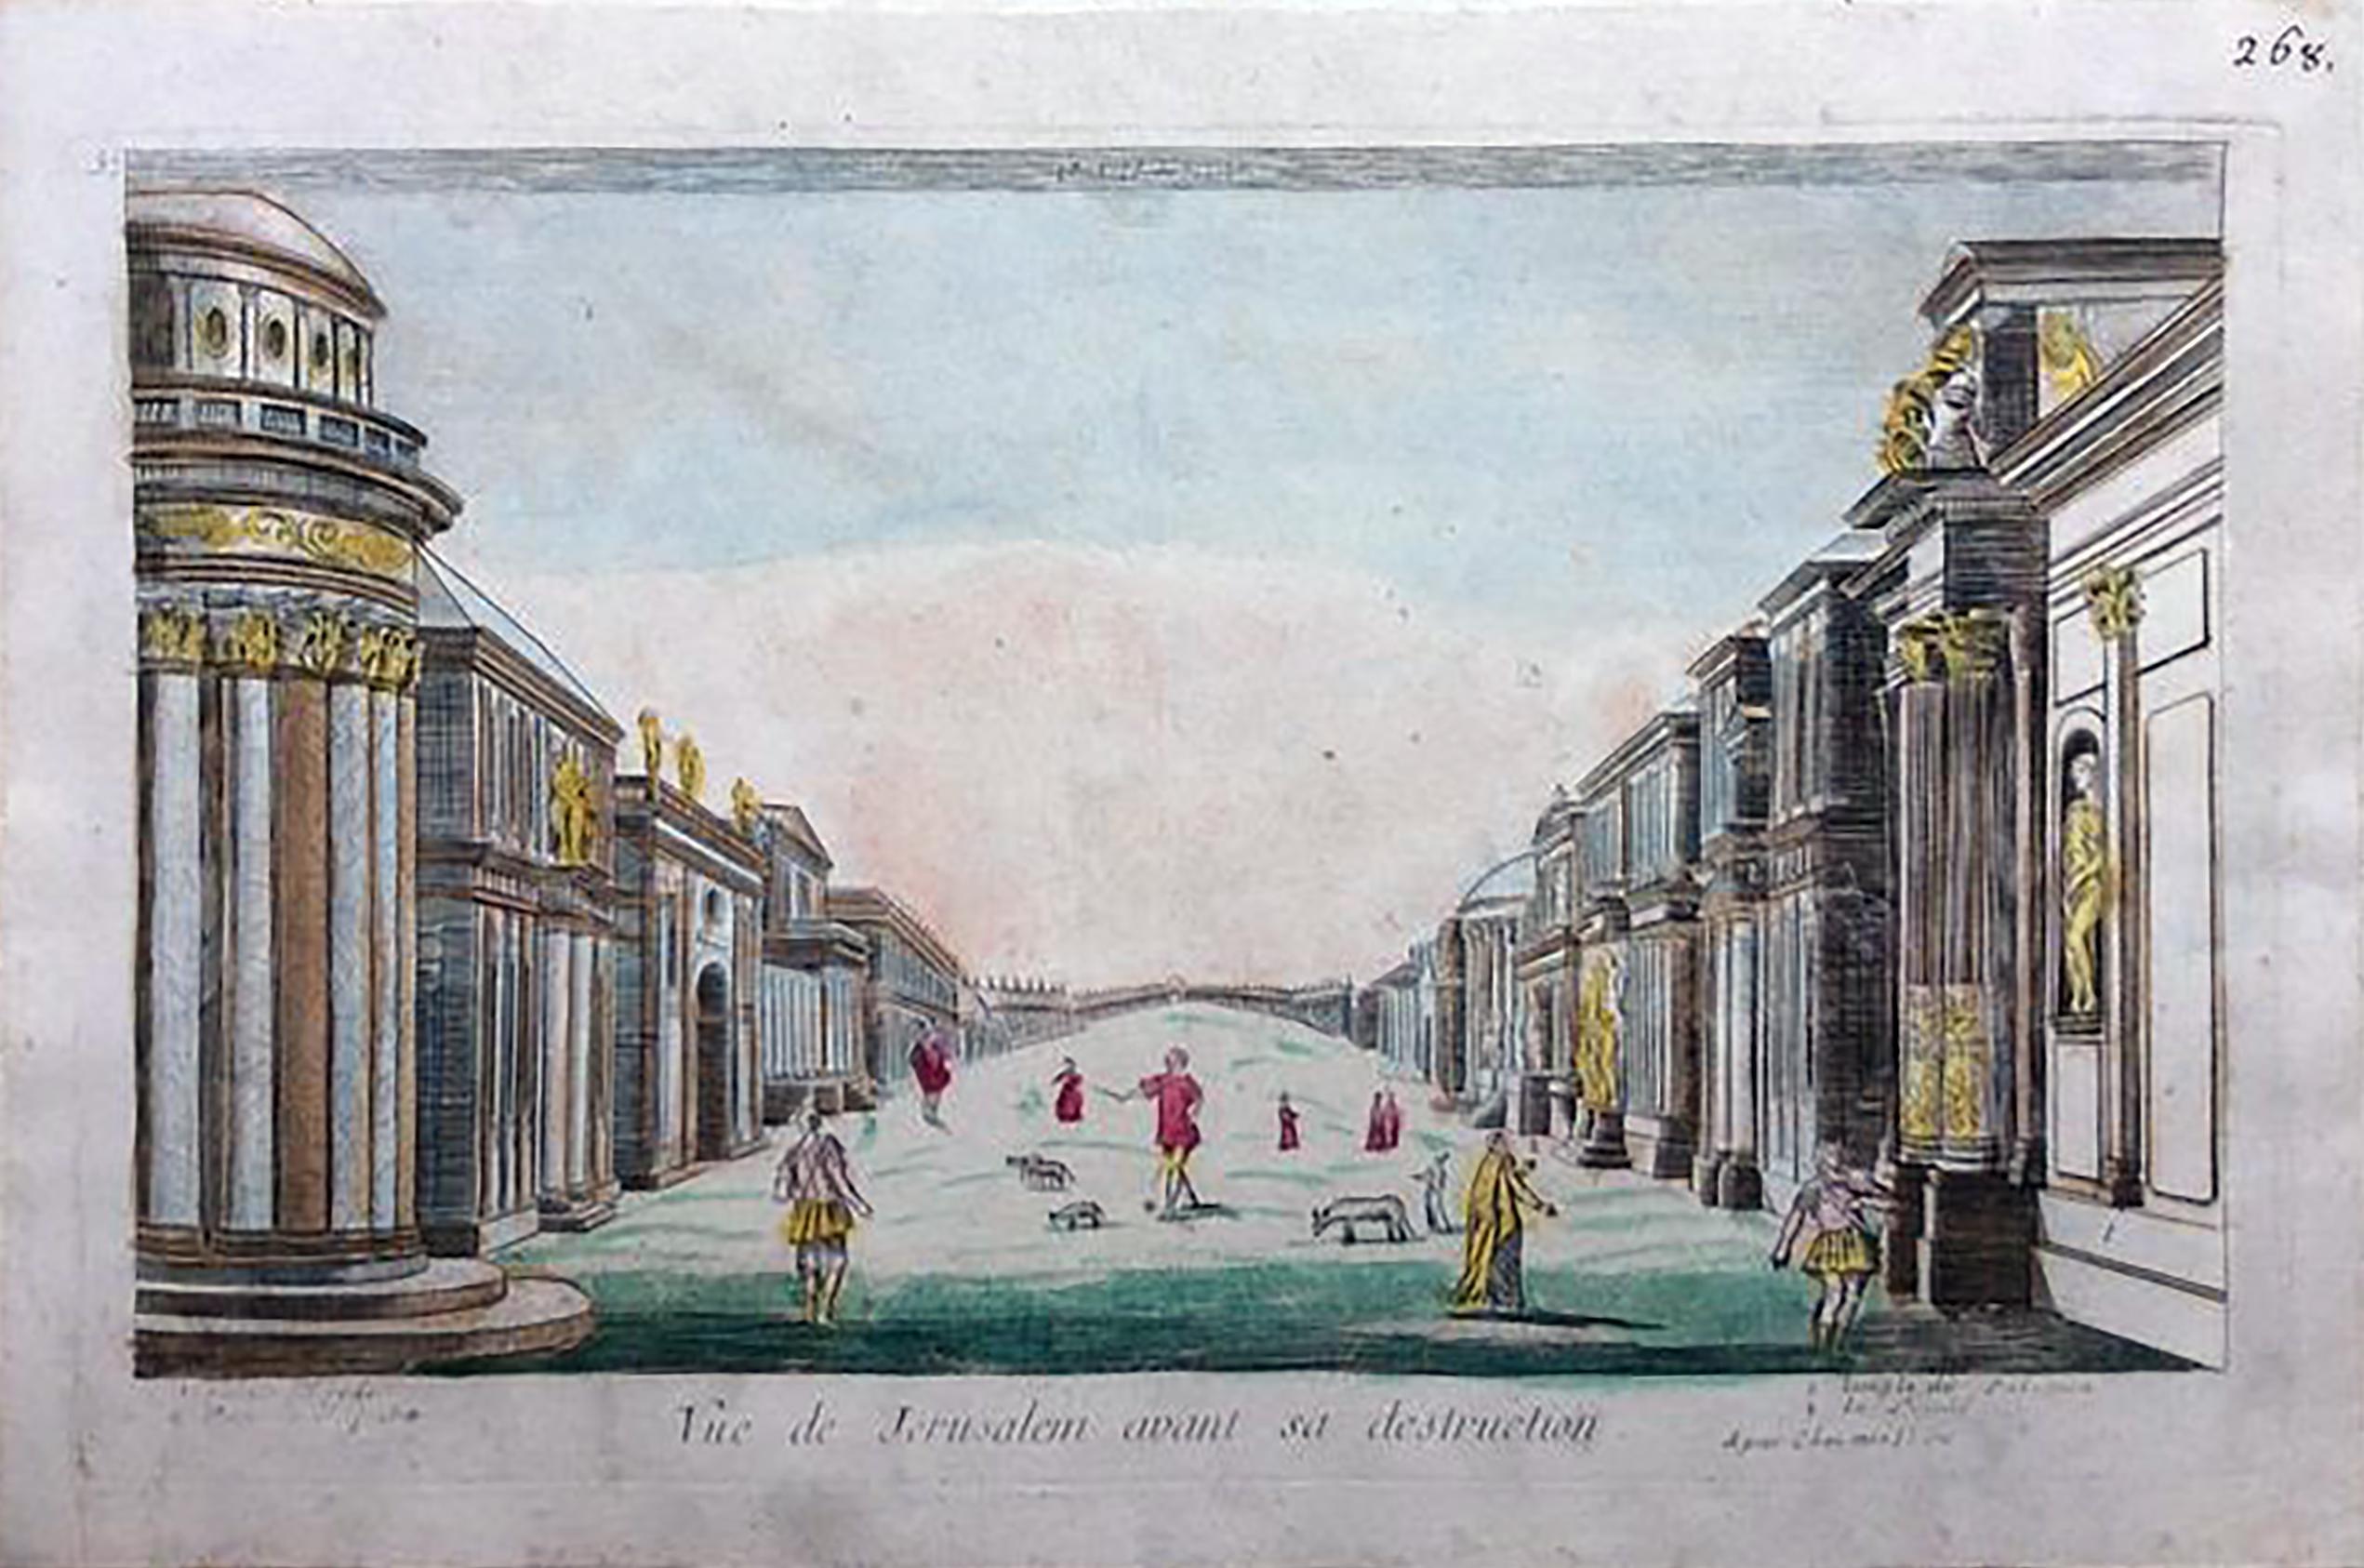 18th c. Hand-colored Optical View Engraving VUE OF JERUSALEM AVANT SA DESTRUCTION [VIEW OF JERUSALEM BEFORE ITS DESTRUCTION] by Louis-Joseph Mondhare (French, 1734-1799)  Published: Paris, France, ca. 1780  Inscribed in upper right corner with plate